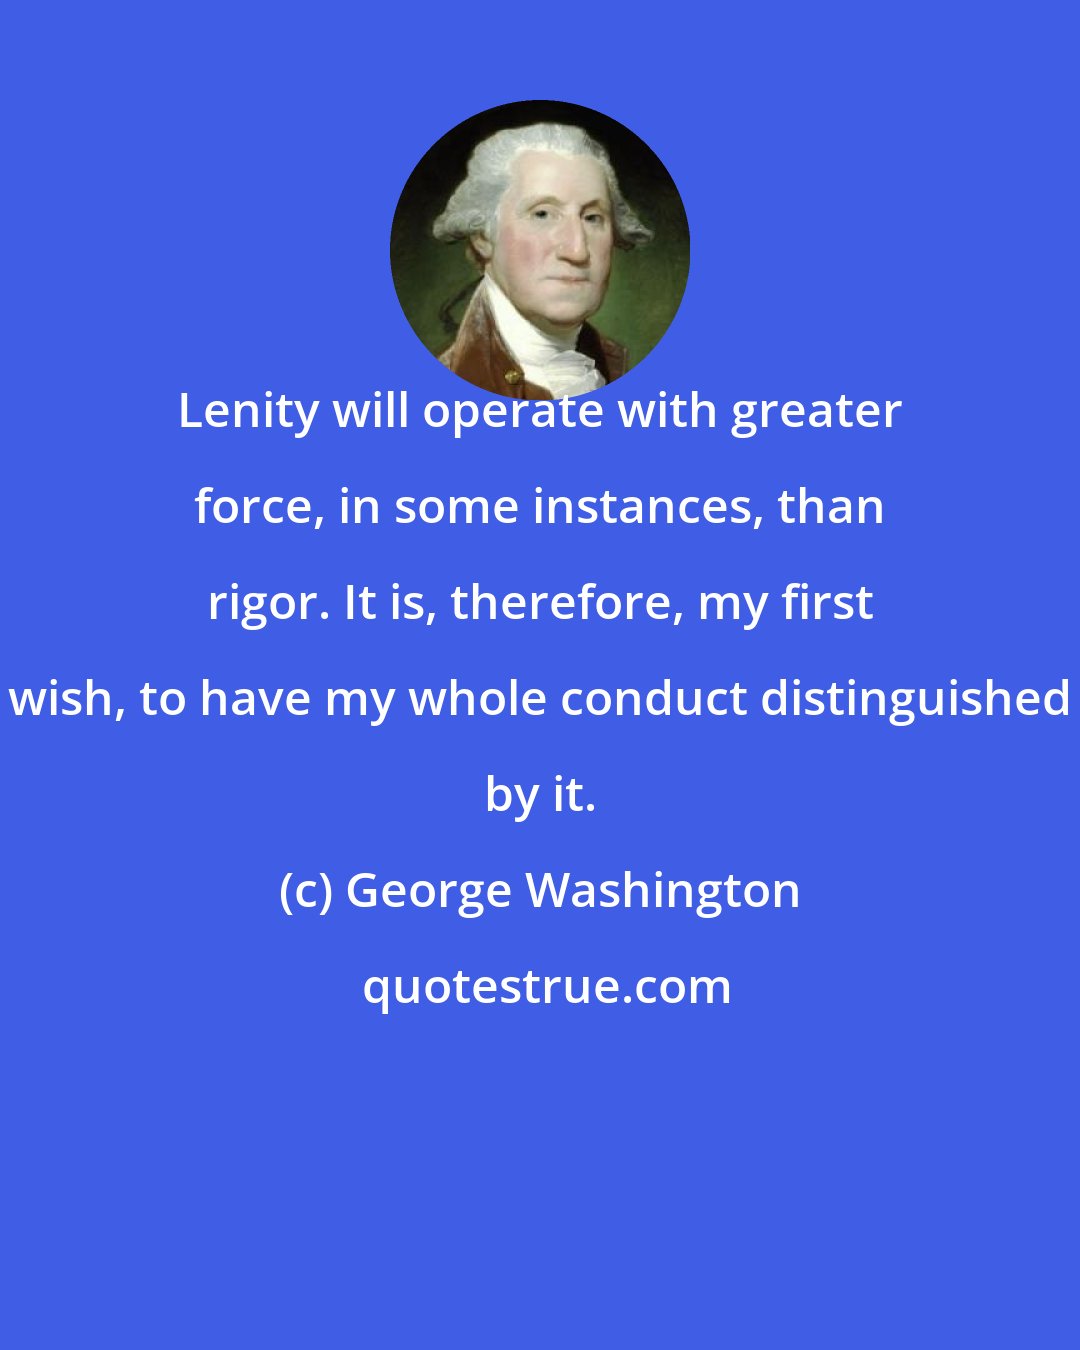 George Washington: Lenity will operate with greater force, in some instances, than rigor. It is, therefore, my first wish, to have my whole conduct distinguished by it.